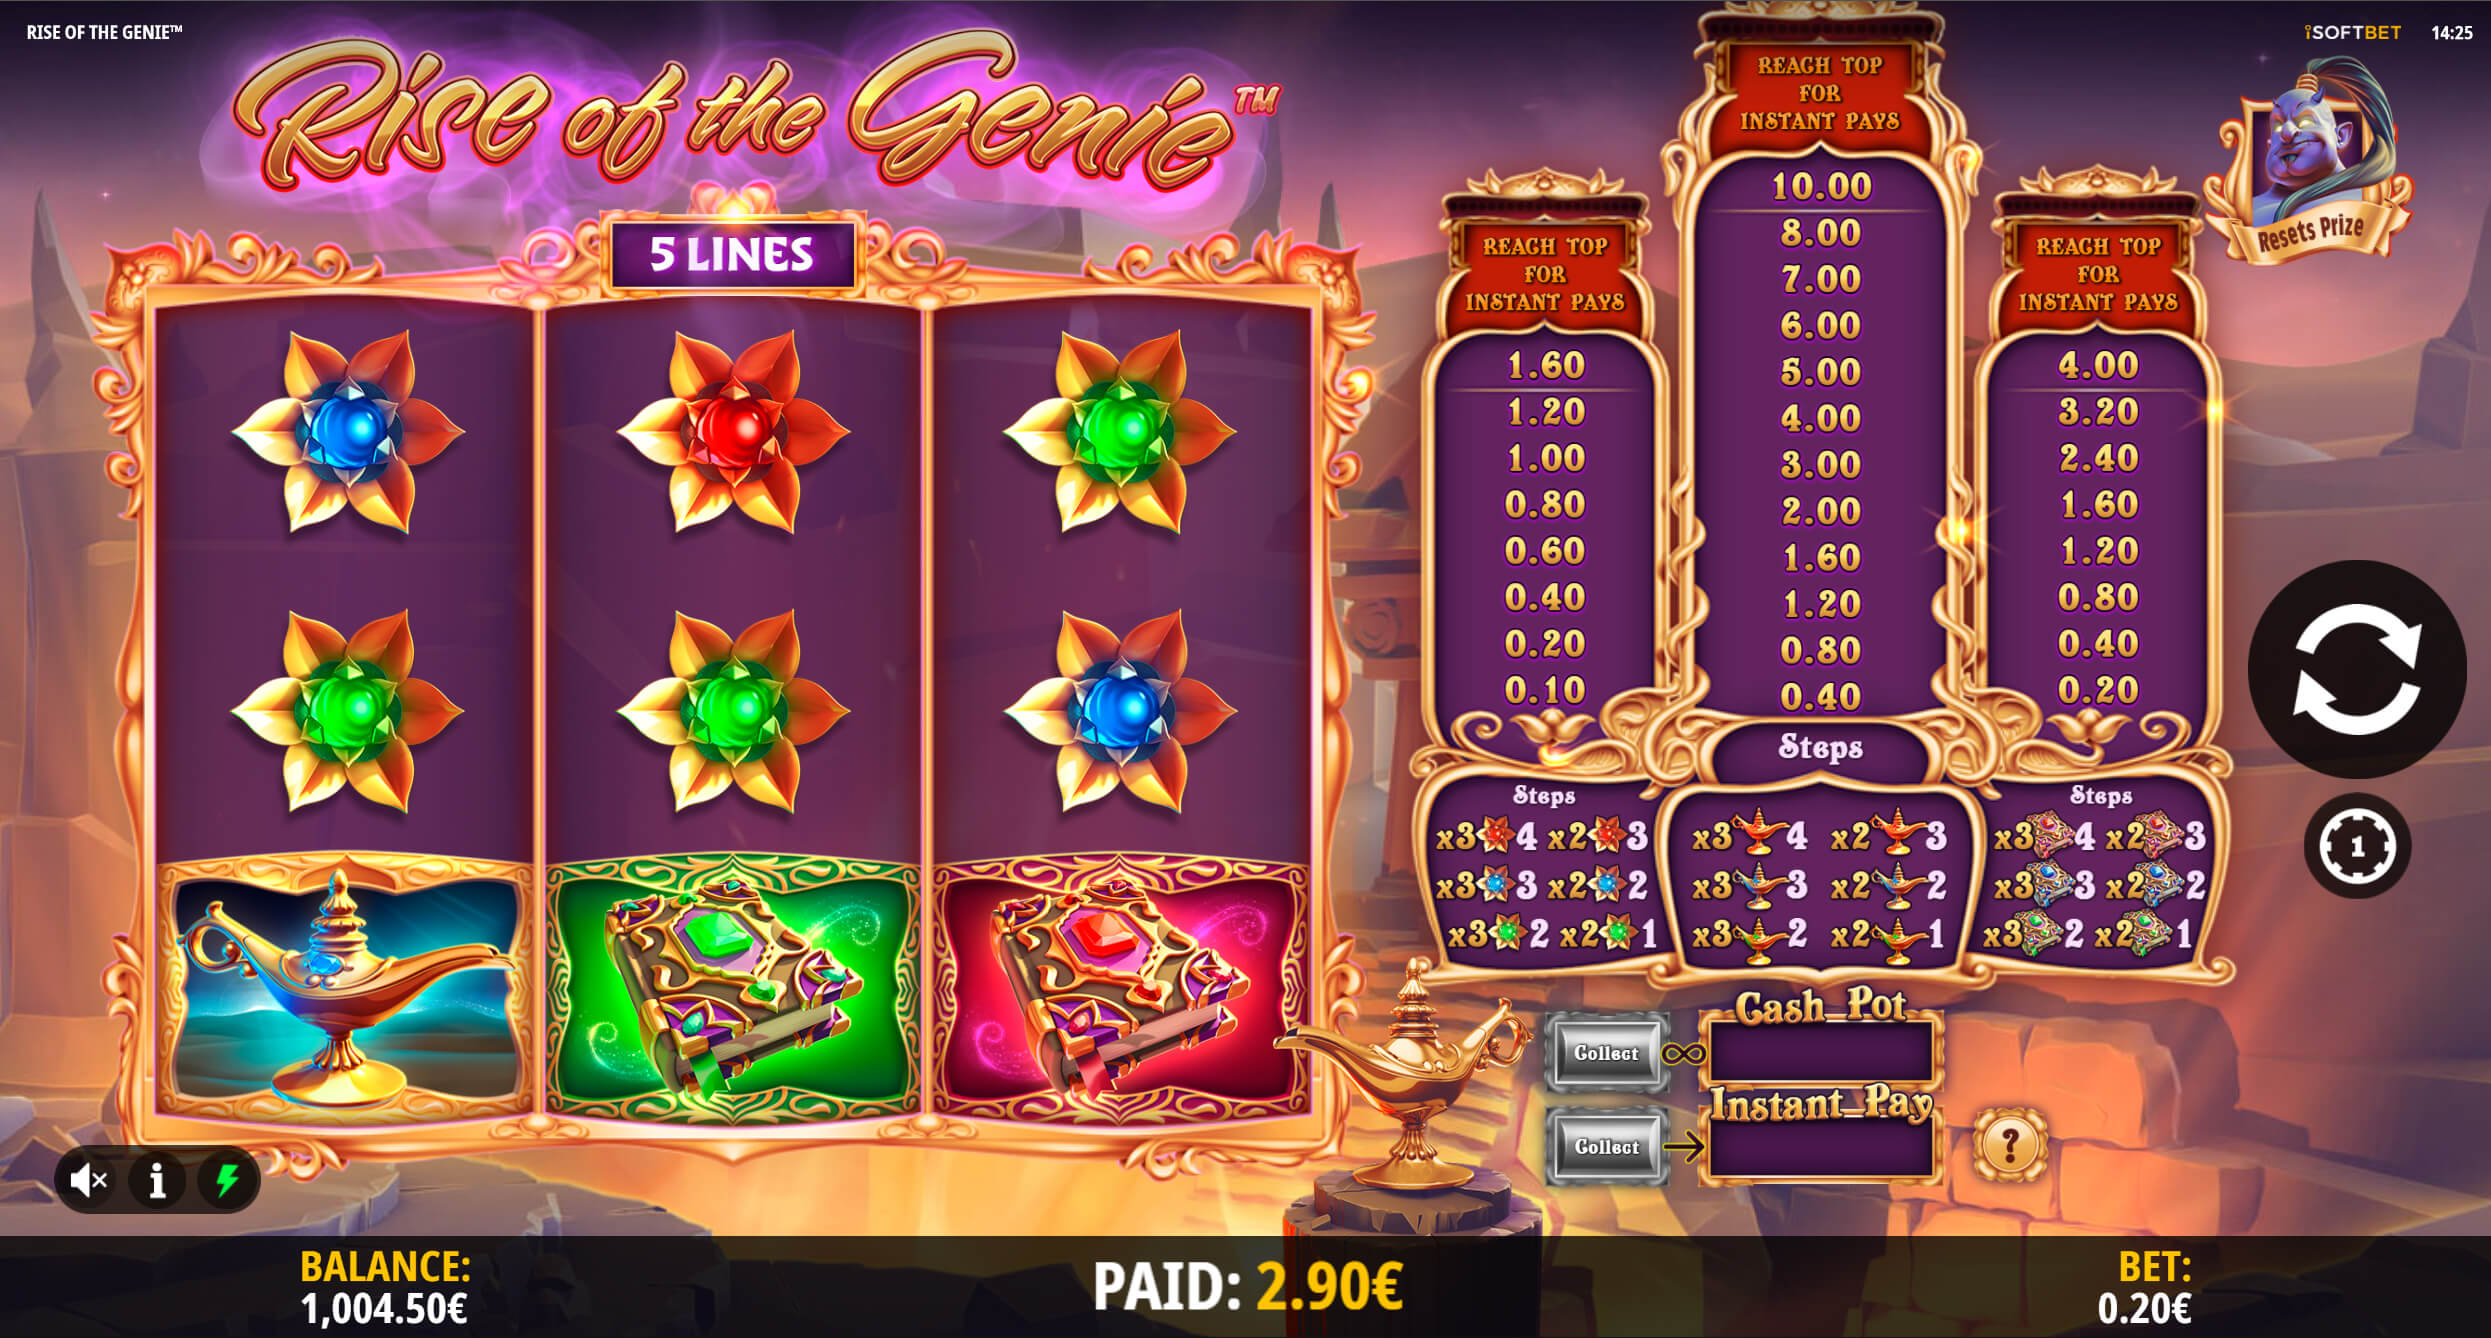 Rise of the genie slot